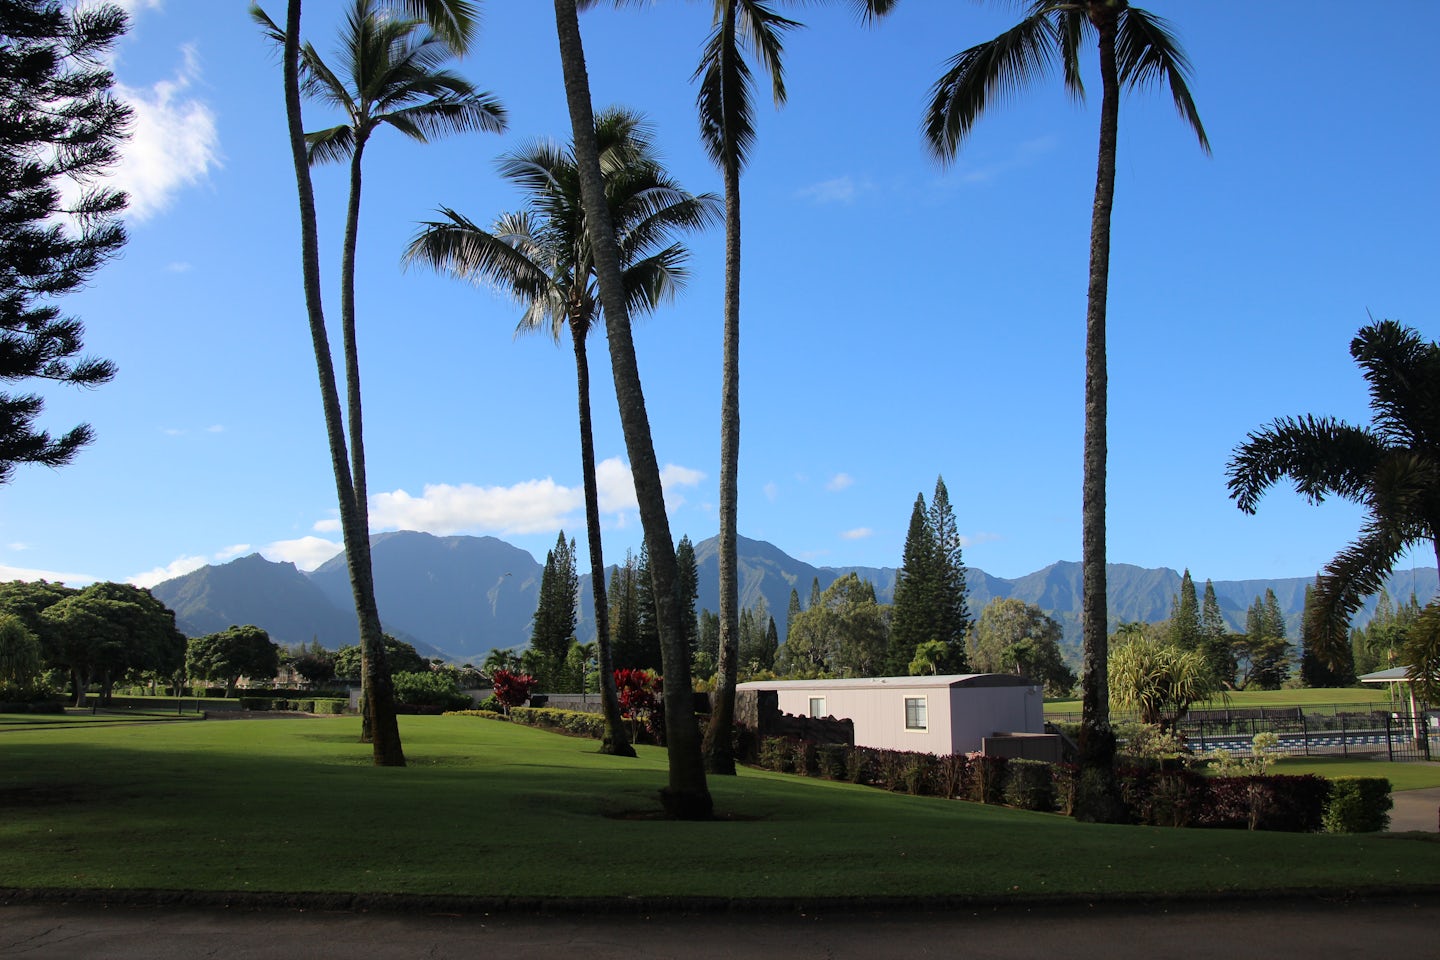 Kauai is beautiful .,. along the East and North shores